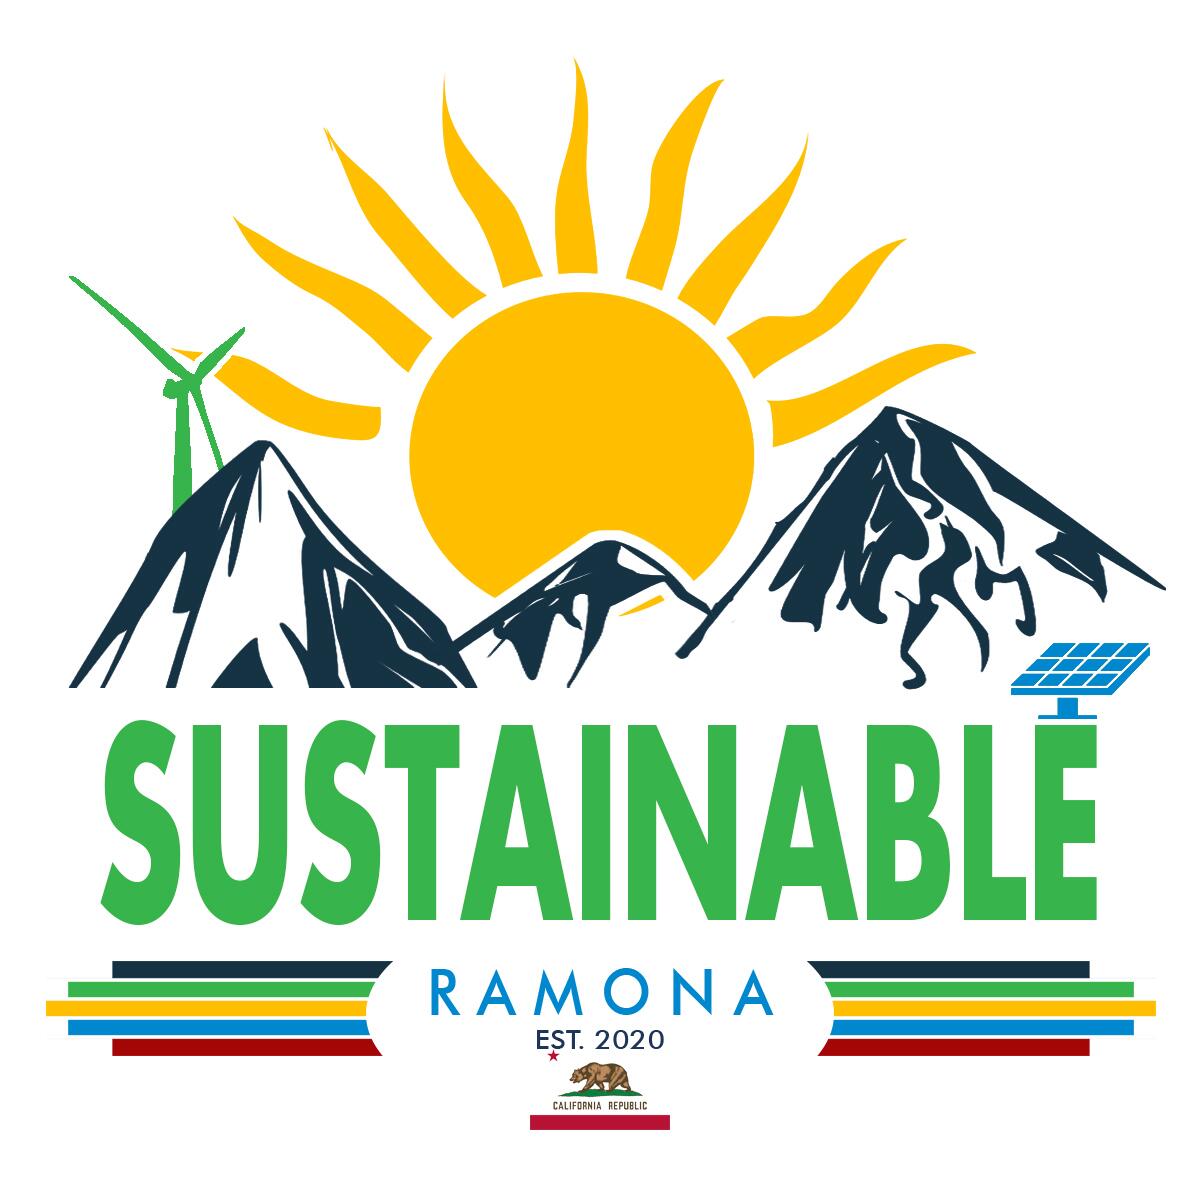 The grassroots Sustainable Ramona will present a Zoom series on Green Buildings Nov. 8-11.